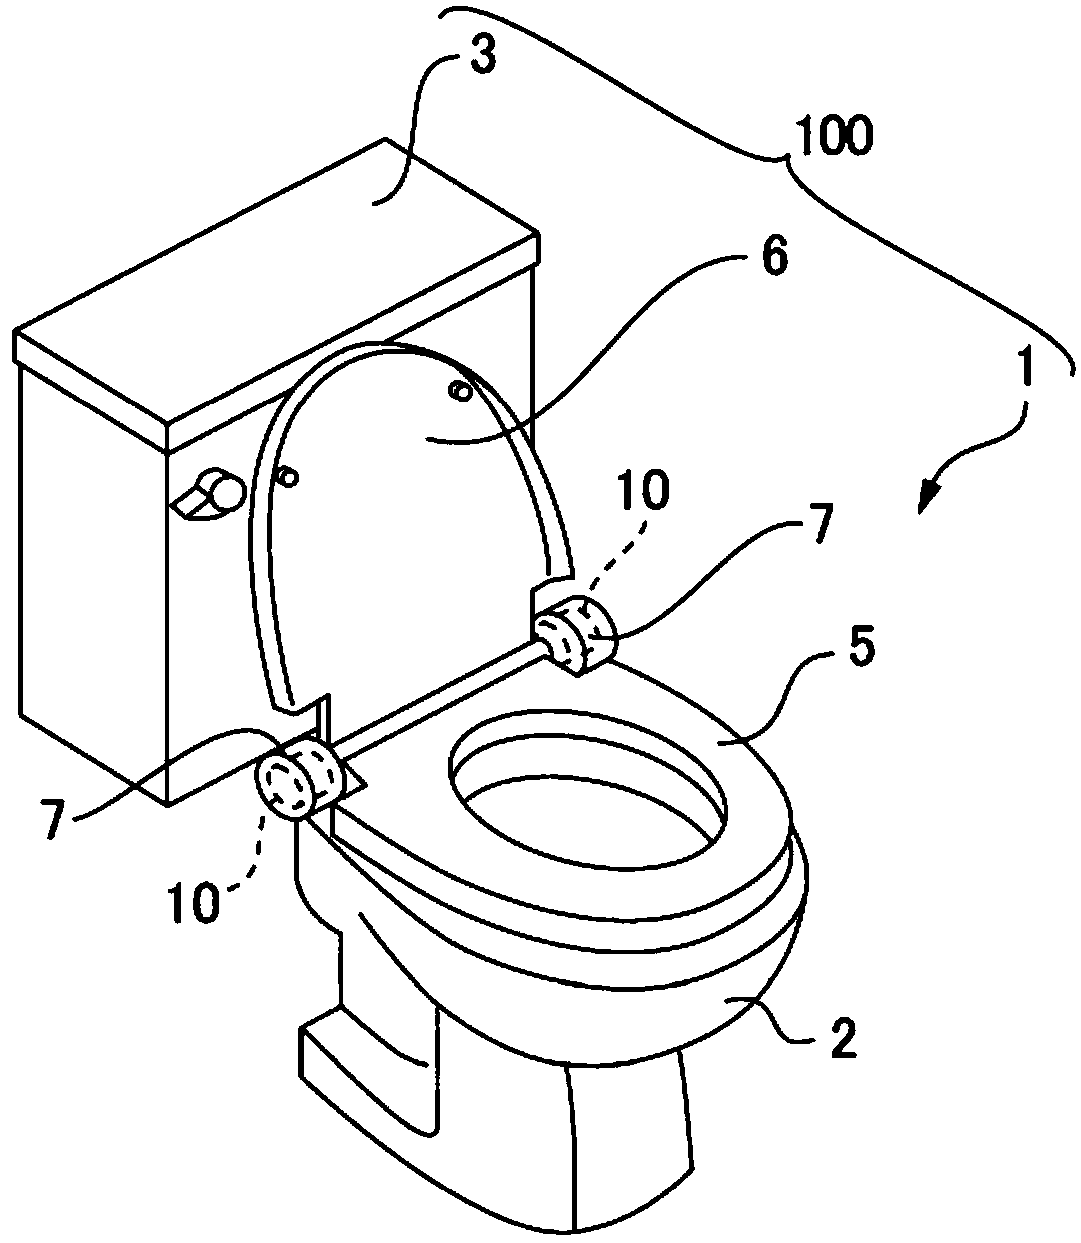 Fluid damper device and apparatus with damper